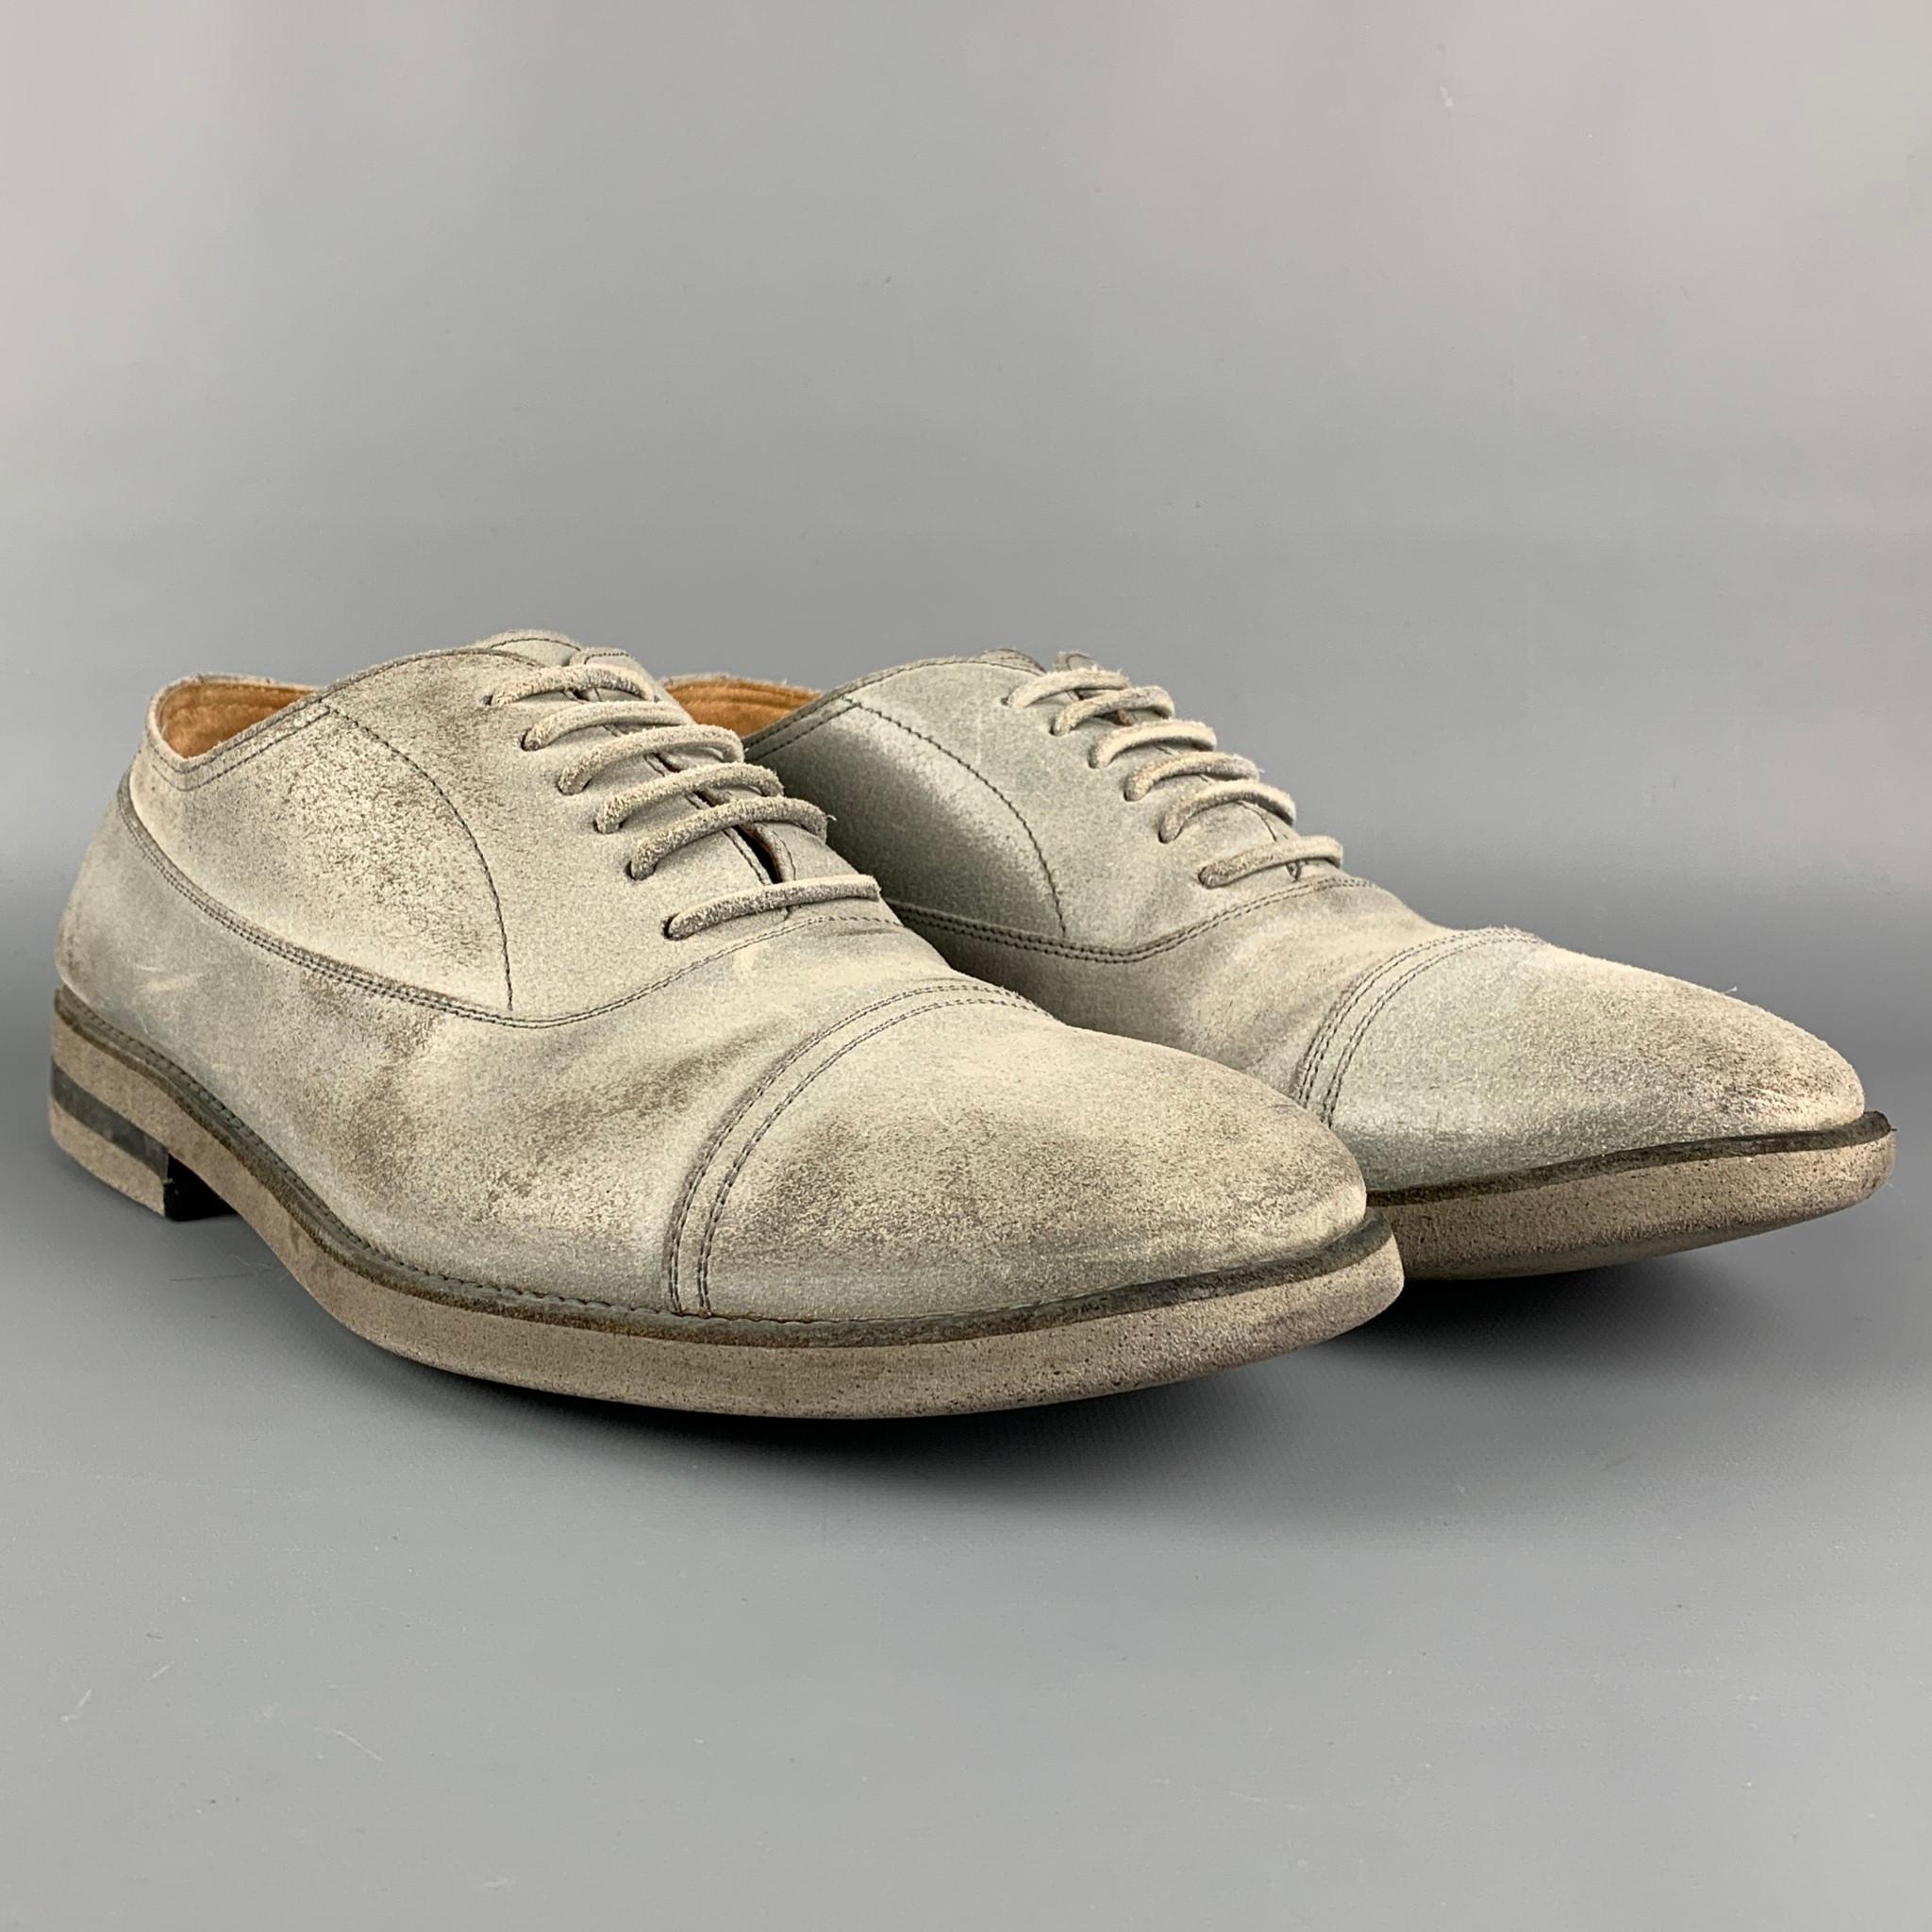 MAISON MARTIN MARGIELA shoes comes in a grey distressed suede featuring a cap toe and a lace up closure. Made in Italy.

Very Good Pre-Owned Condition.
Marked: 44

Outsole: 12.5 in. x 4.5 in. 